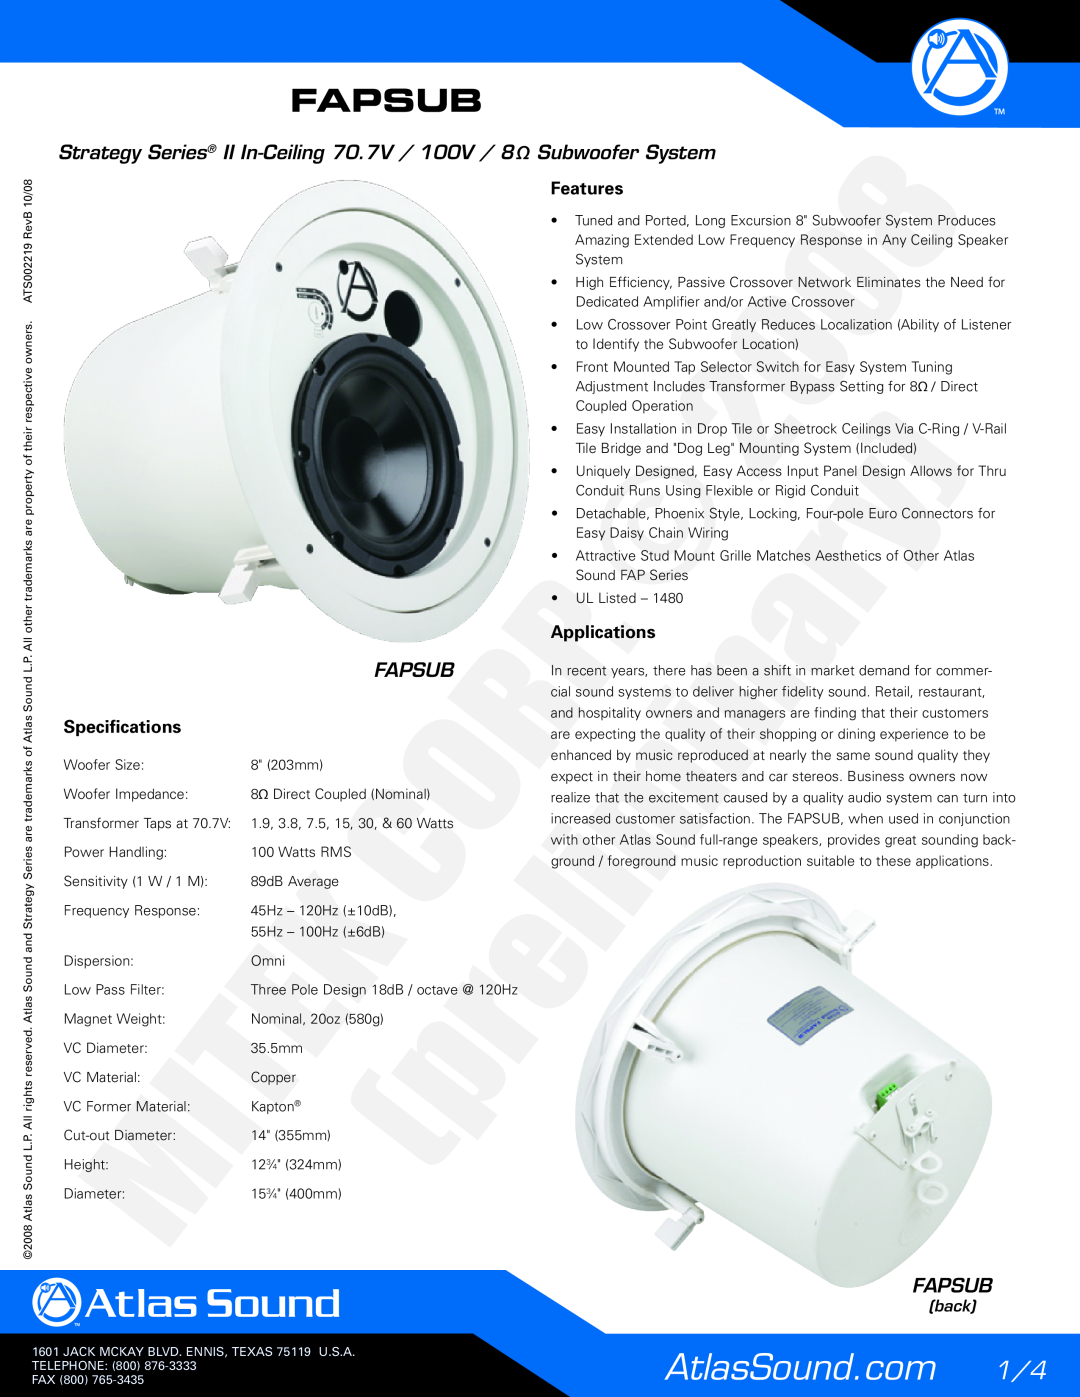 Atlas Sound 70.7V, 100V specifications Fapsub, Specifications, Features, Applications, back 